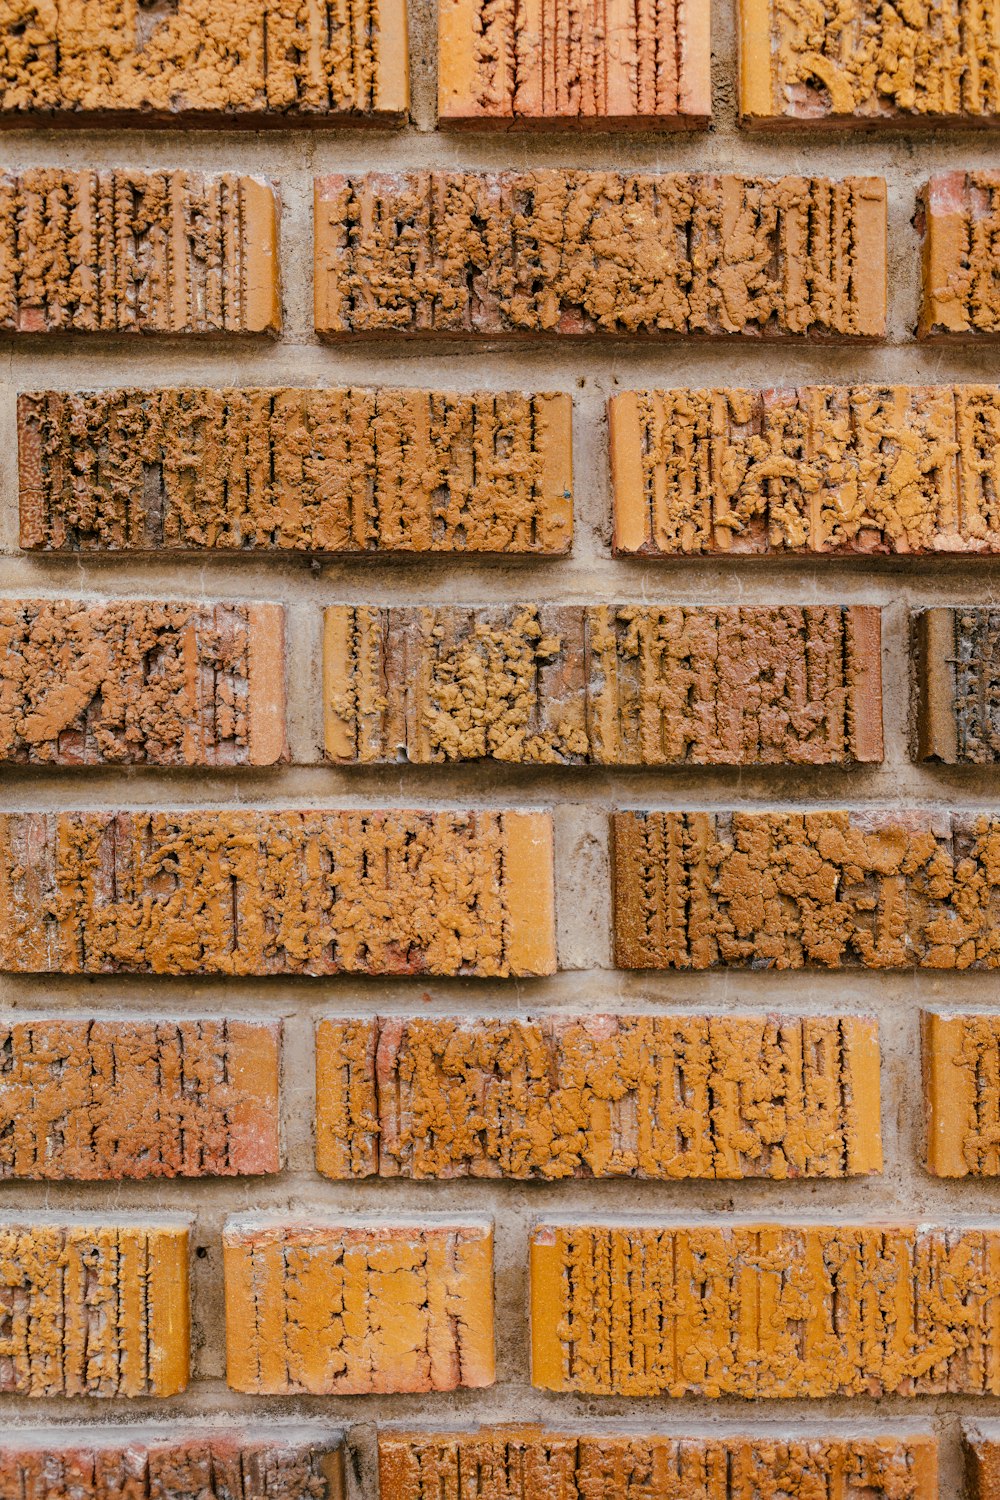 a close up of a brick wall with writing on it